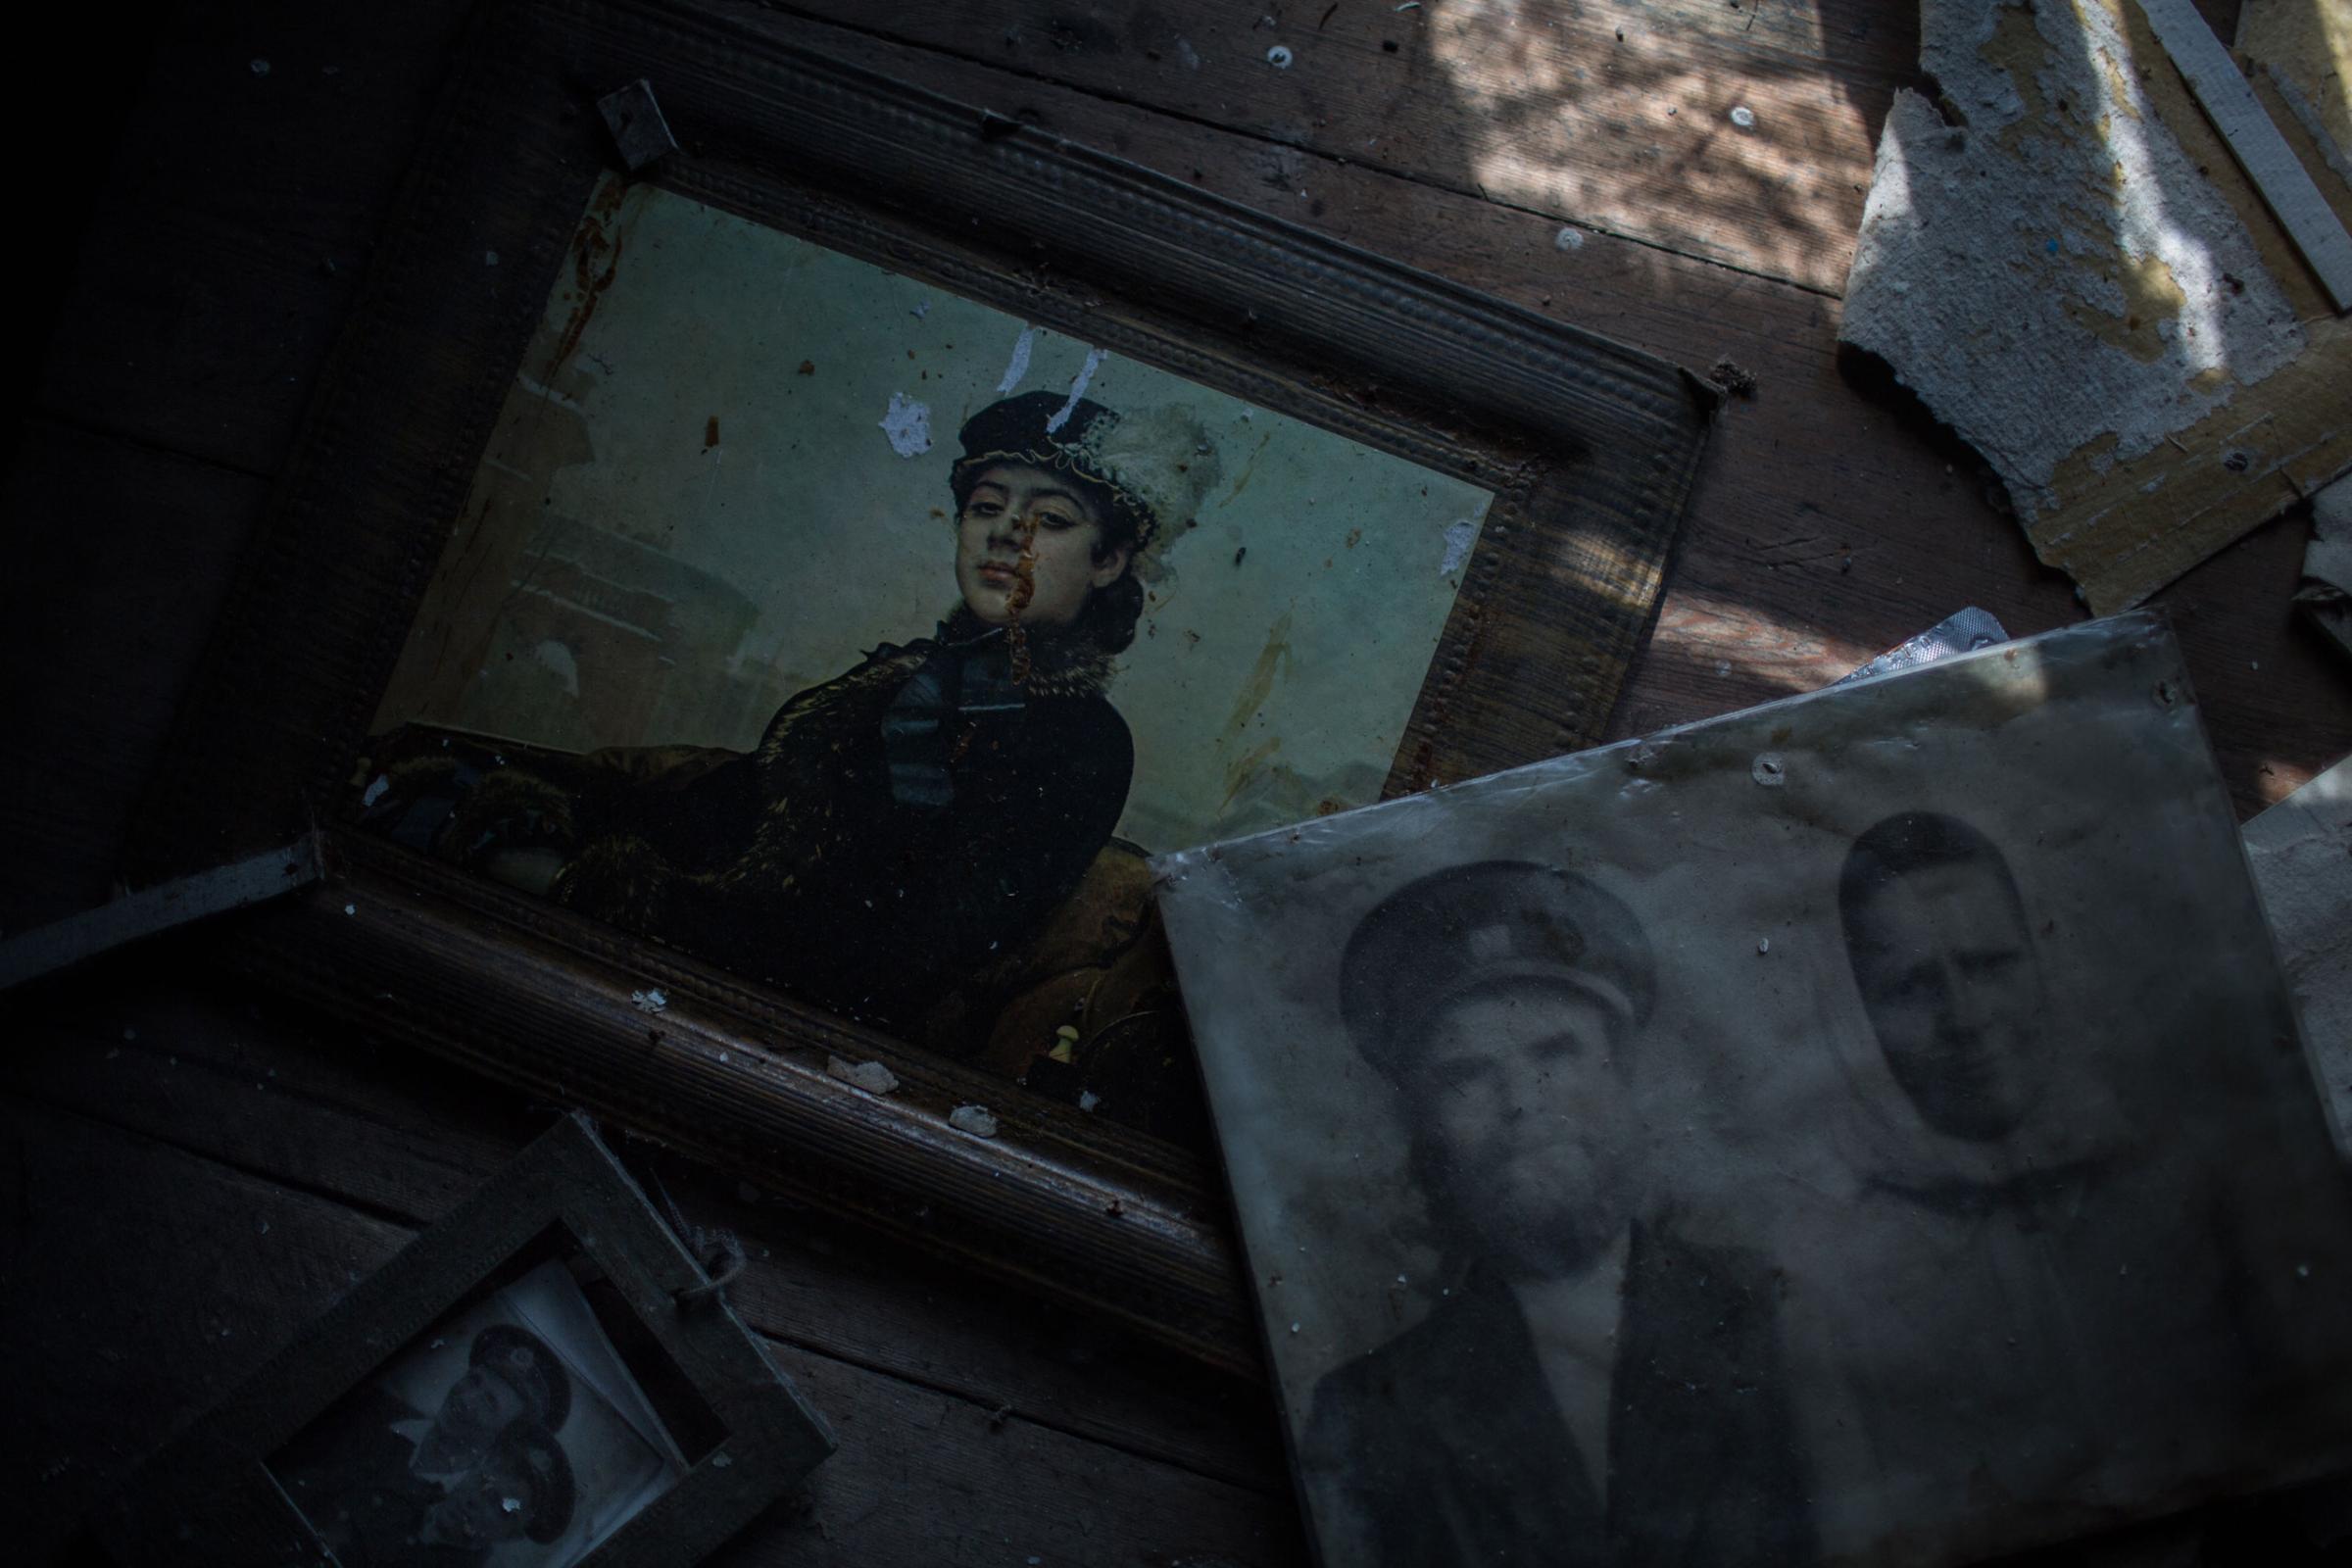 The black-and-white portrait belonged to two people who once lived in a now abandoned house, in the village of Vorobevo. Beneath, a reproduction of Ivan Kramskoy's "The Unknown Woman" is seen.